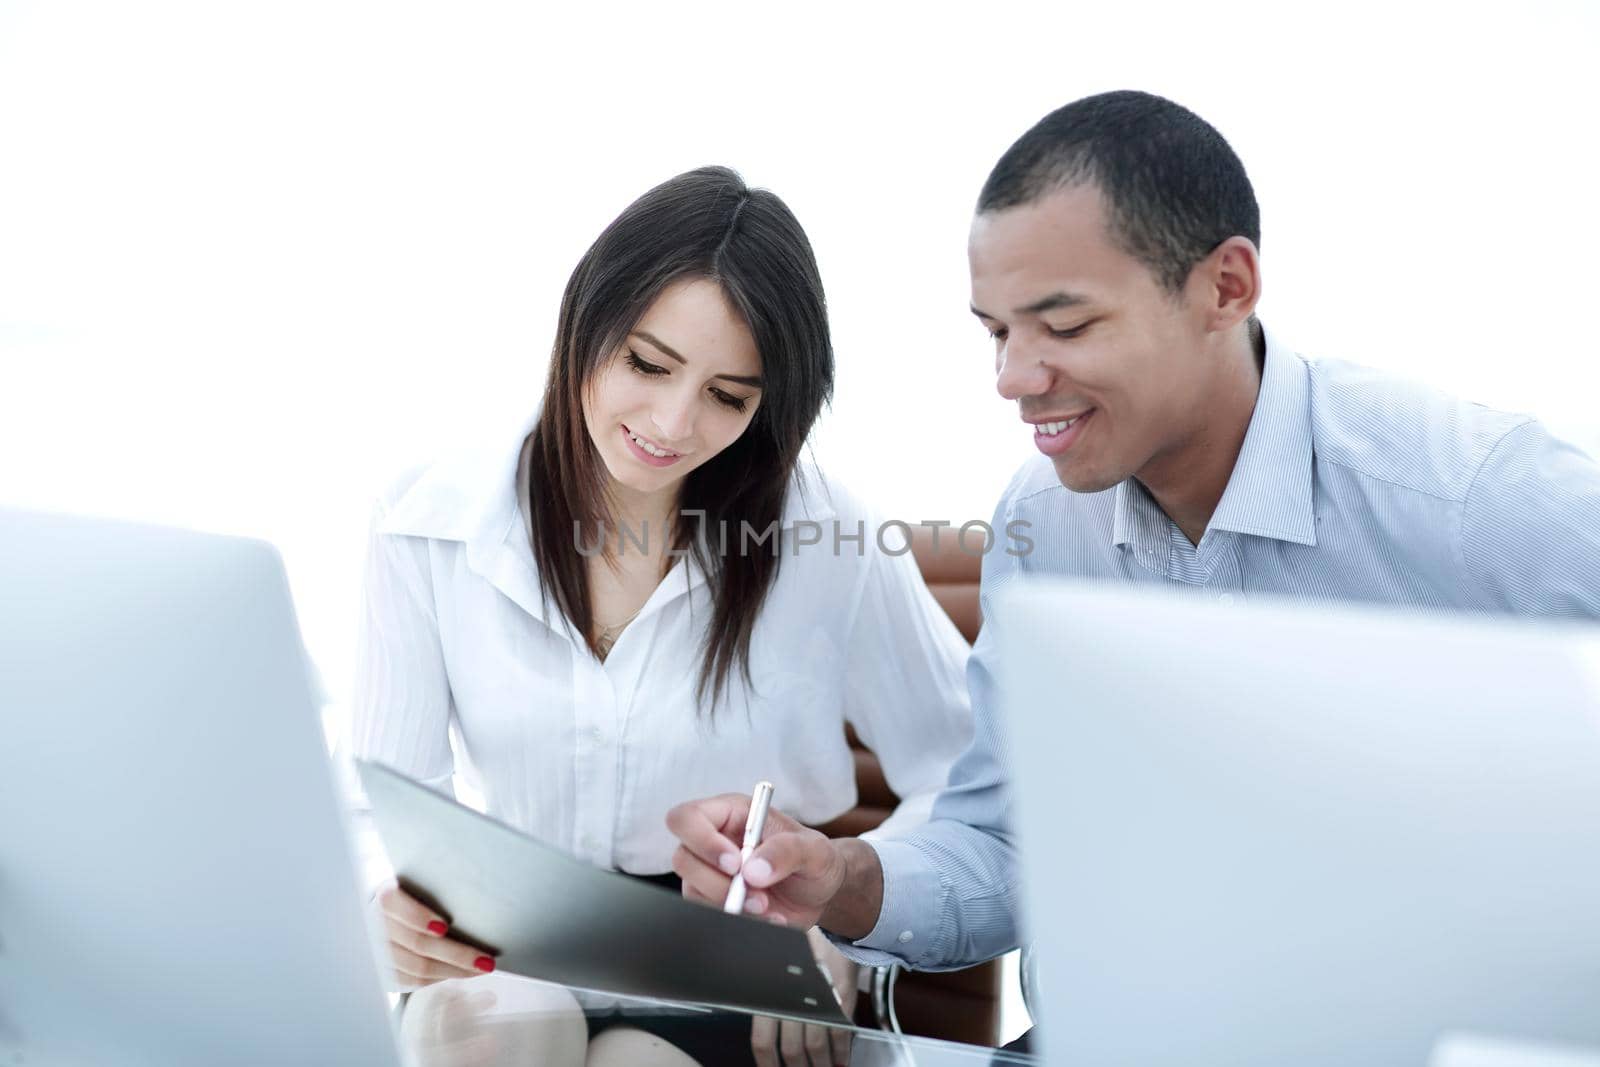 employees discussing financial documents sitting at a Desk by SmartPhotoLab